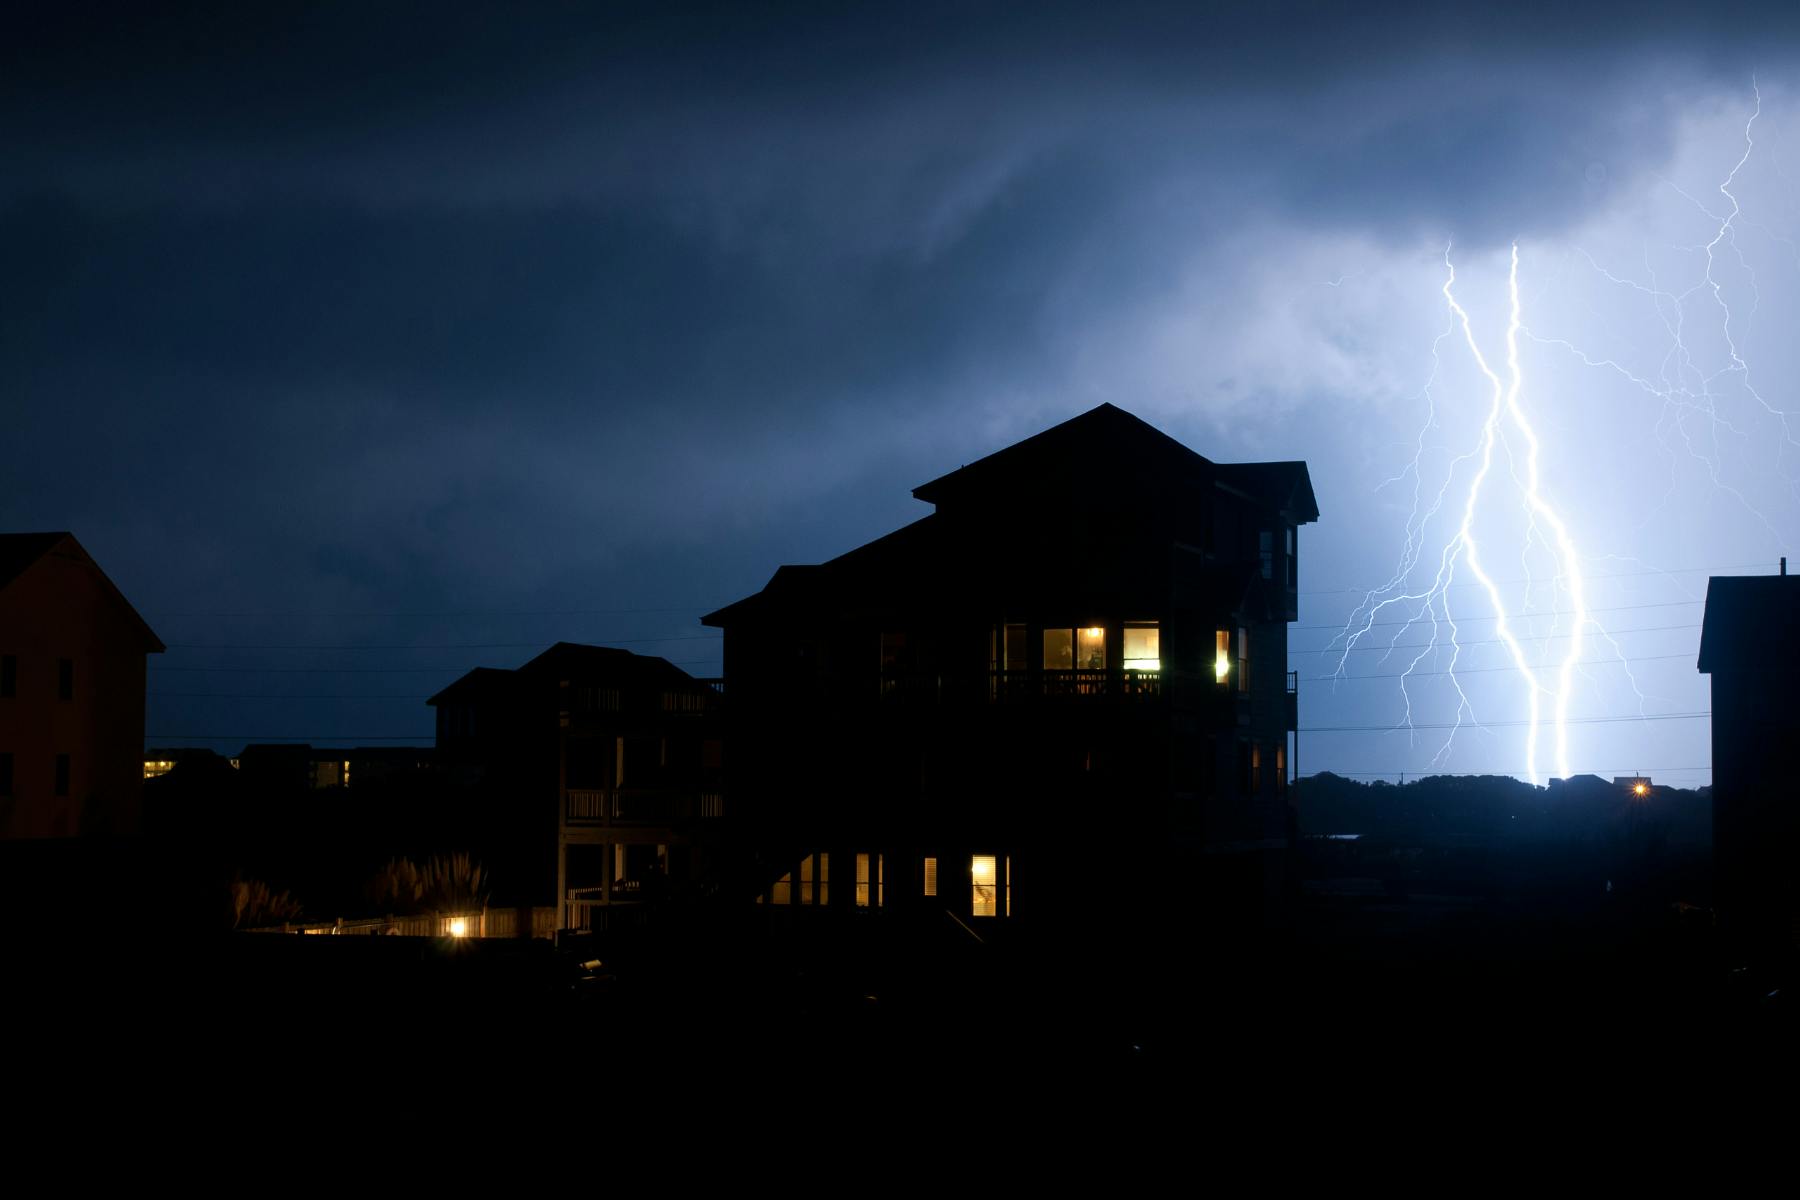 House at night with lightening in the background